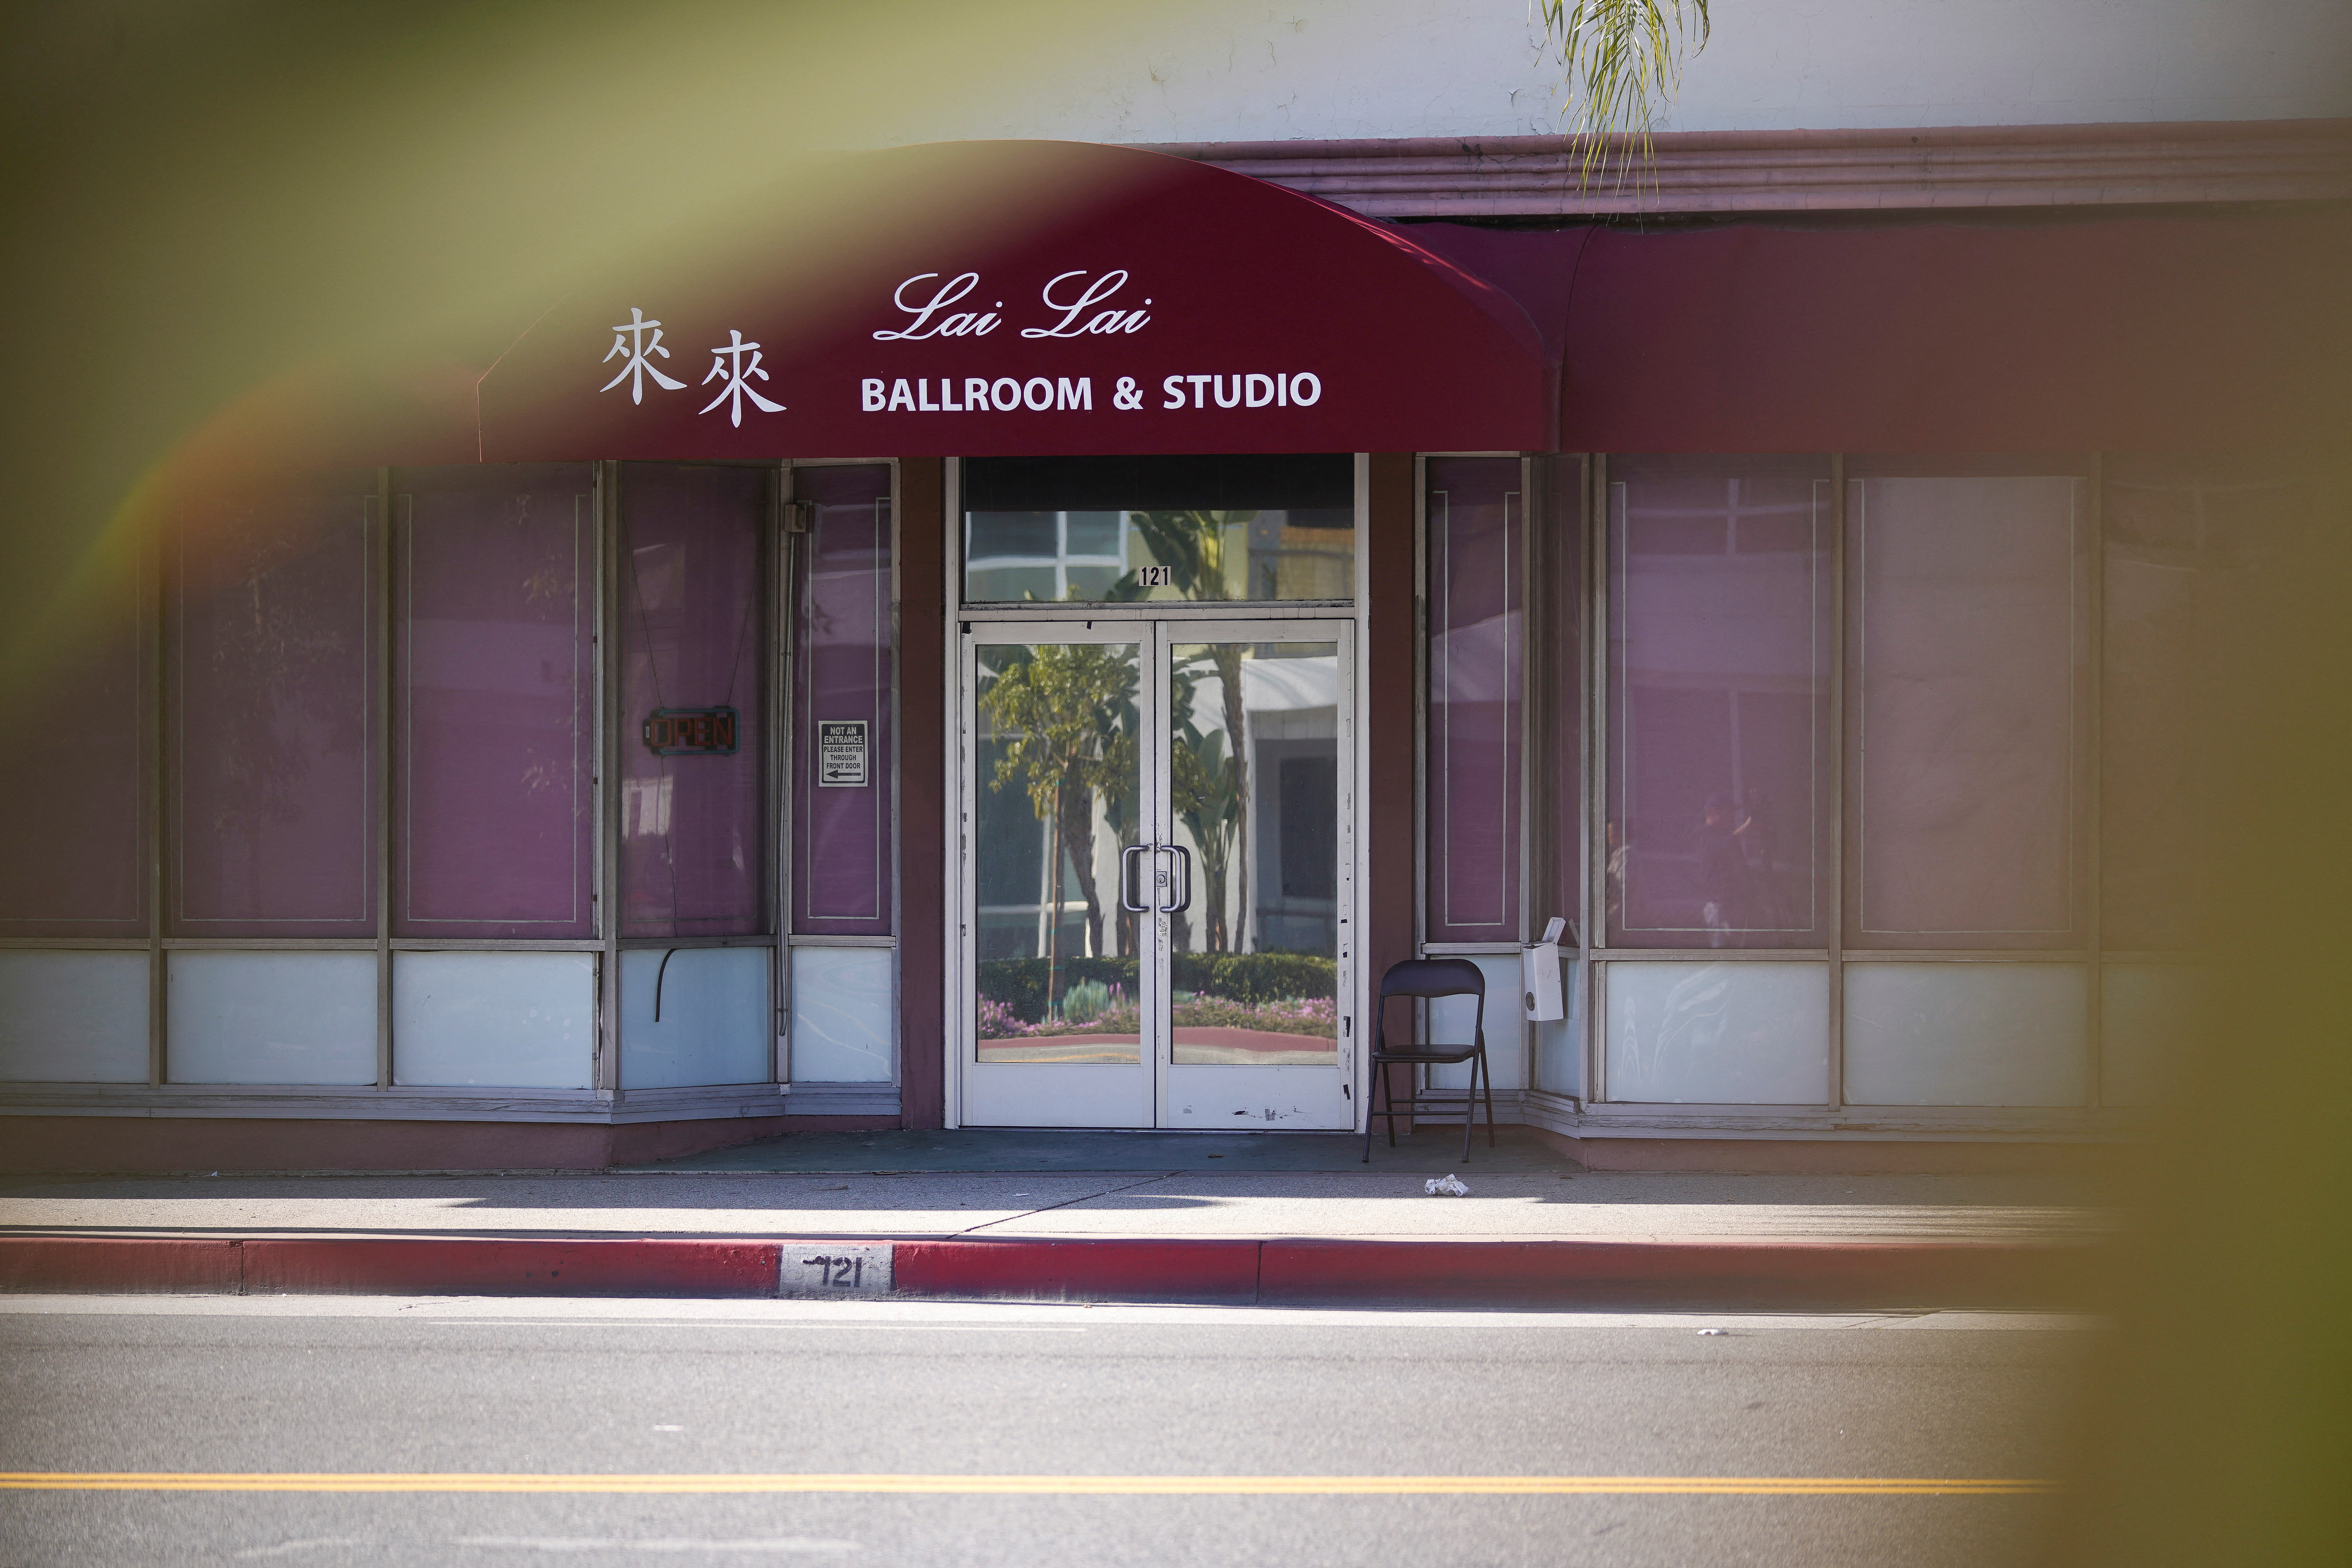 The Lai Lai Ballroom and Studio dance school is closed after an incident in which a man walked in holding a gun, according to witnesses, in the Alhambra area of Los Angeles